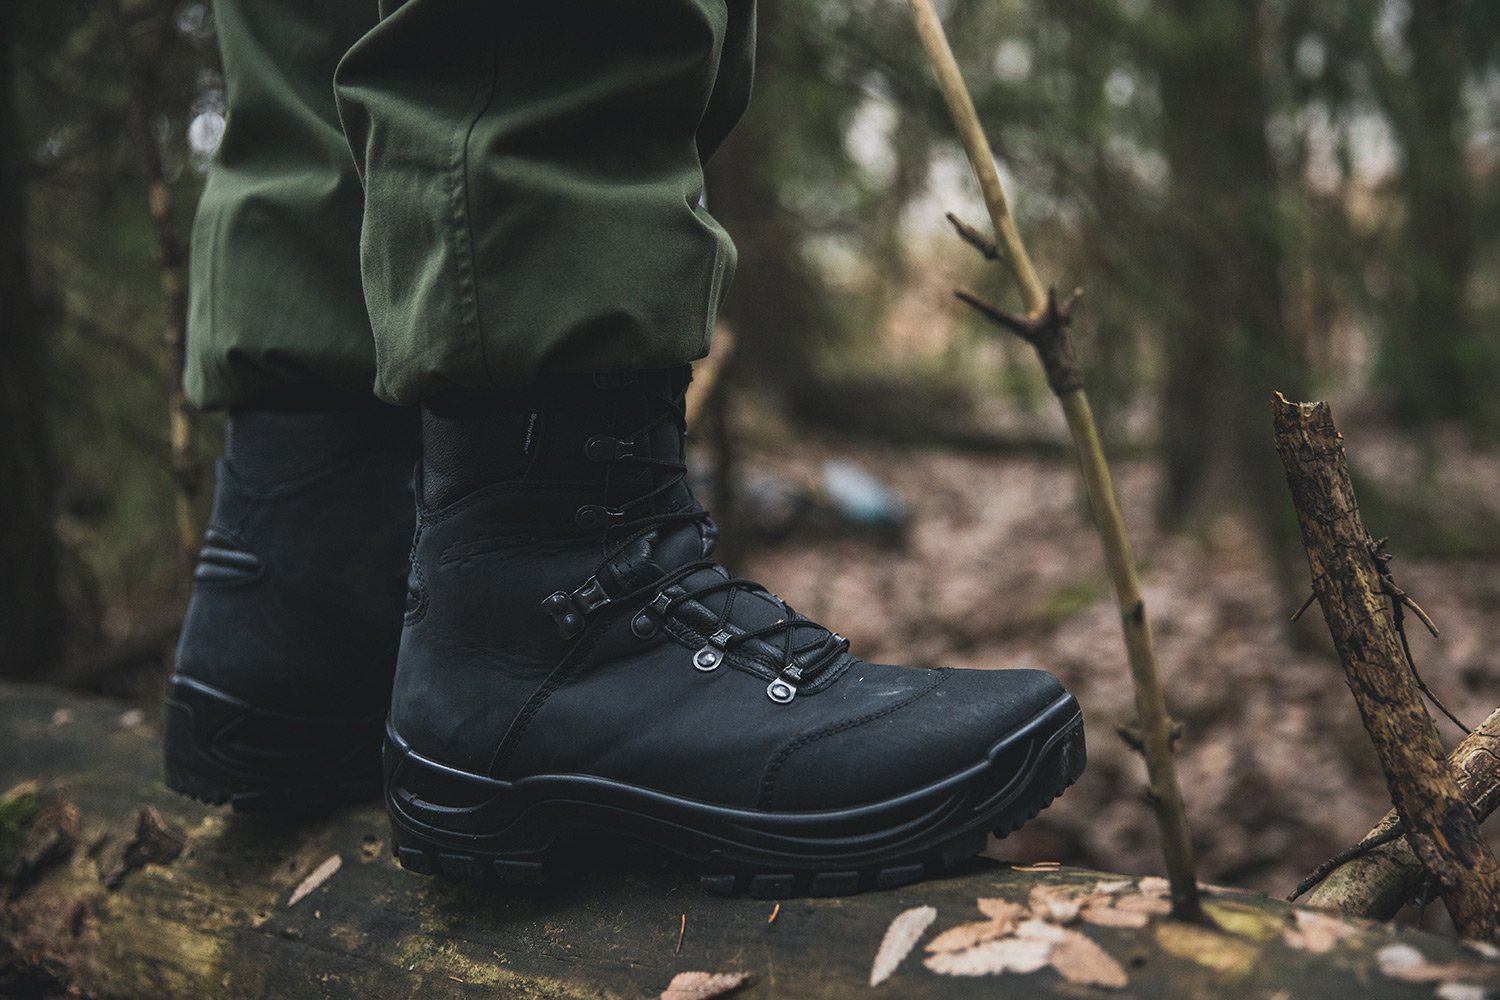 Black hiking boots in a forrest.